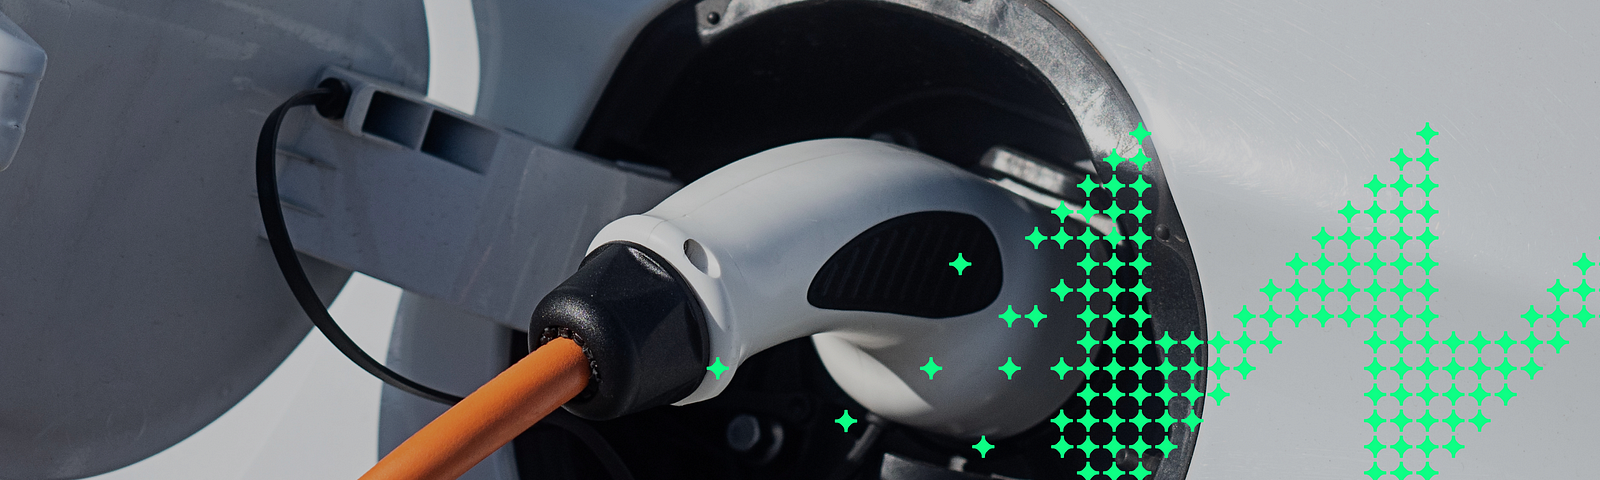 Photo of an electric vehicle plug while charging the car. To the right side of the photo, a graphic element is overlaid; it is a group of individual bright green nodes that come together to form a zig-zag pattern off the right side of the photo.